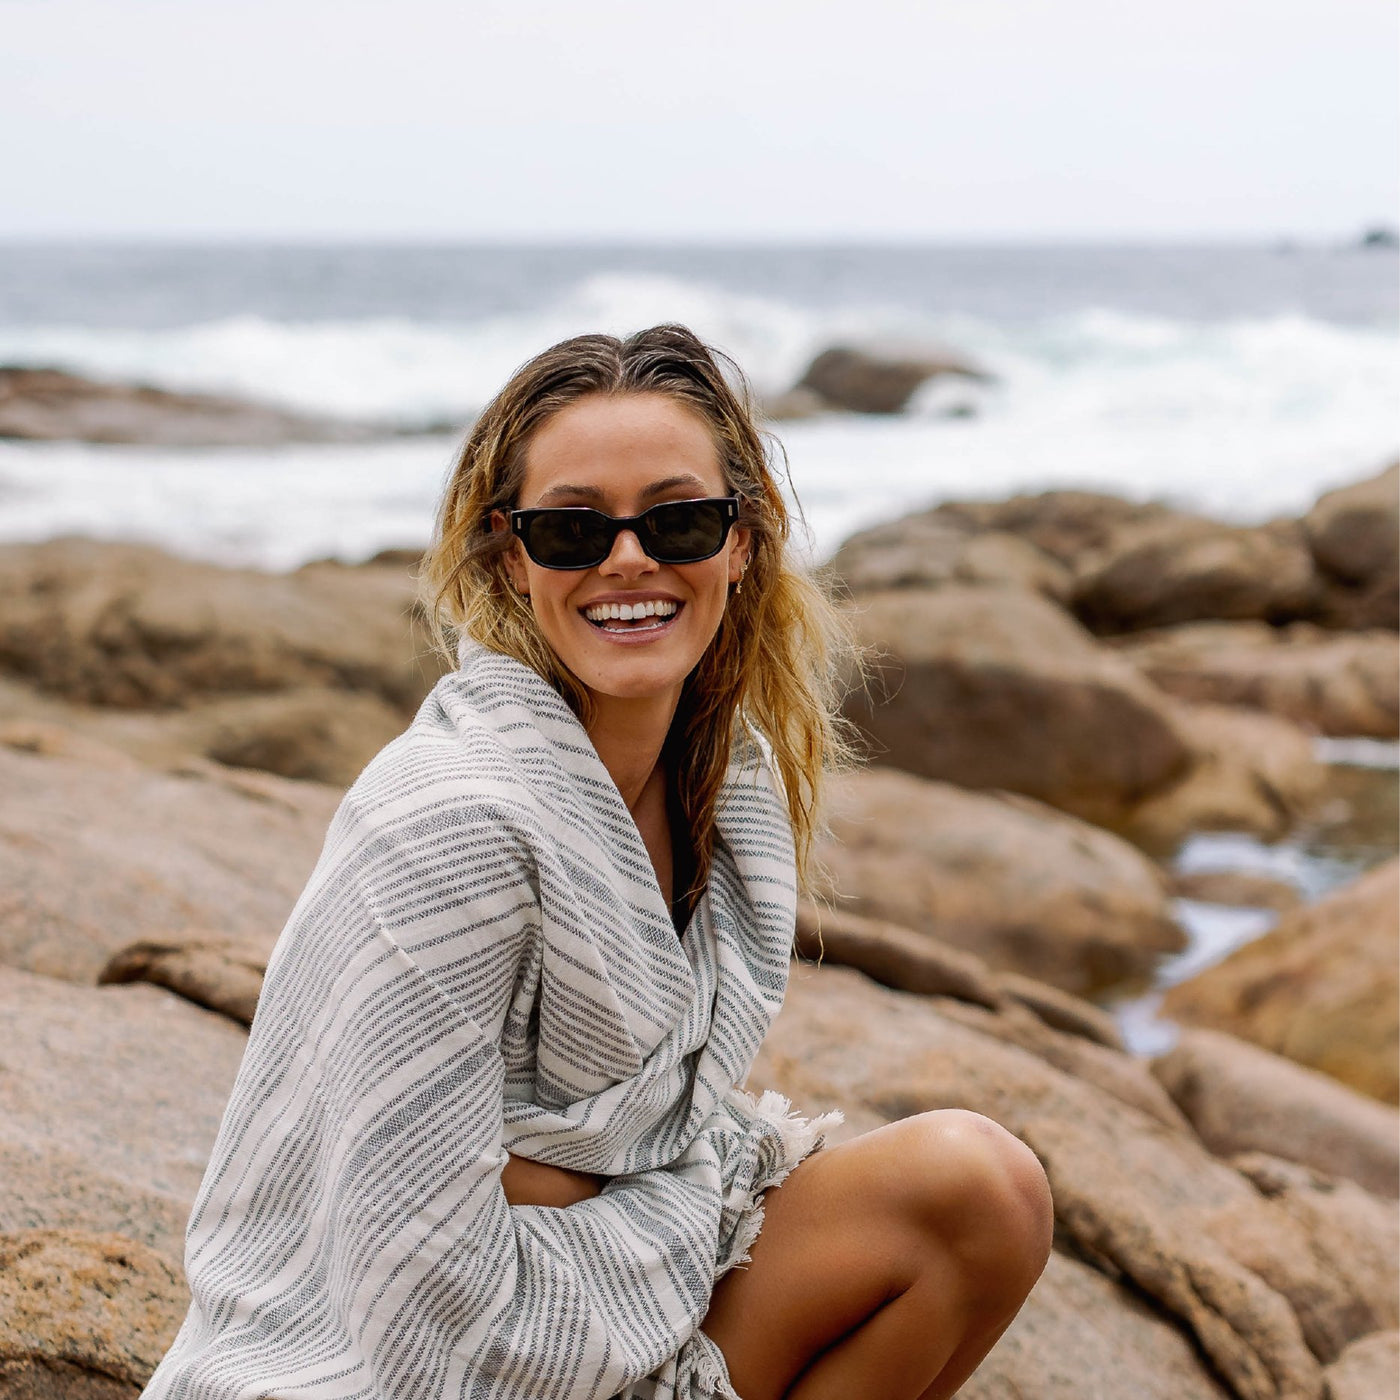 Girl sitting on a rock by the beach wearing a towel wrapped around her and black sunglasses